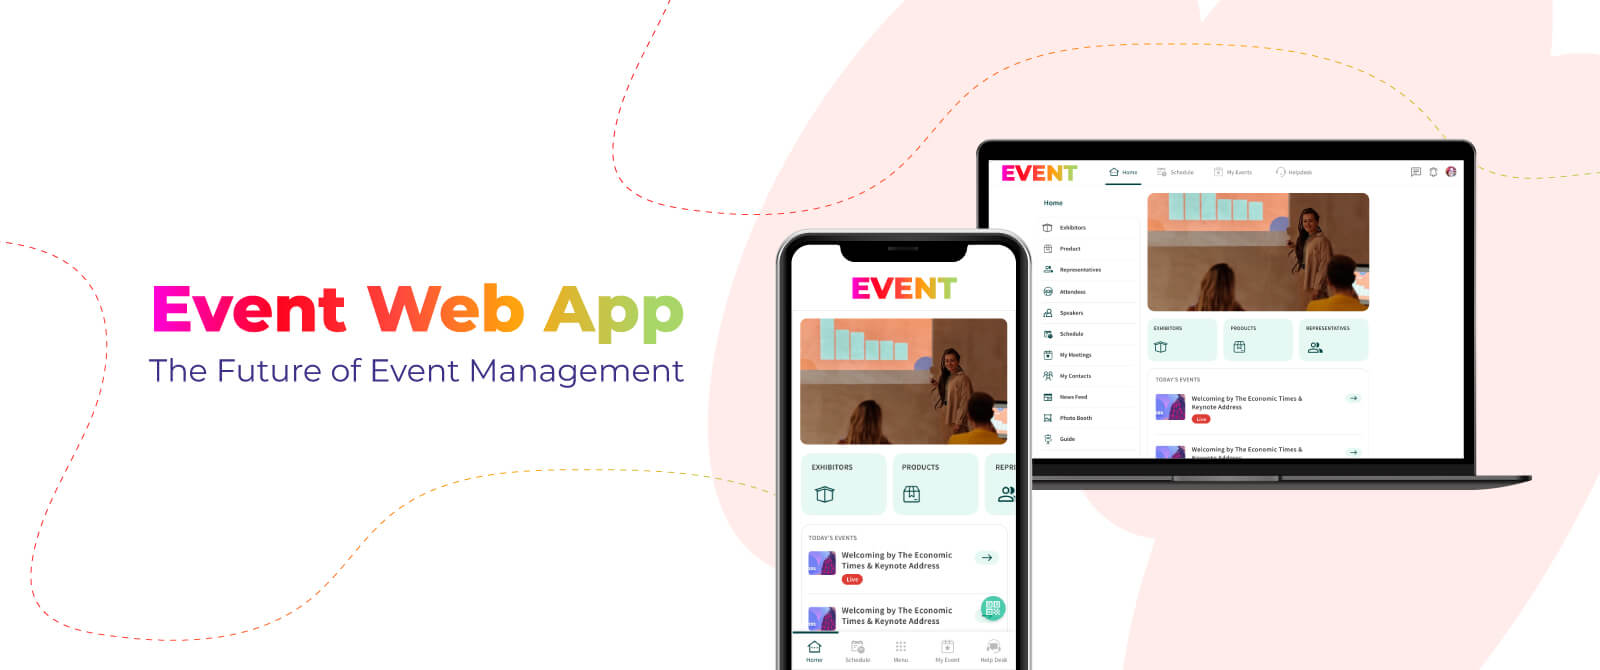 Event Web App: The Future of Event Management